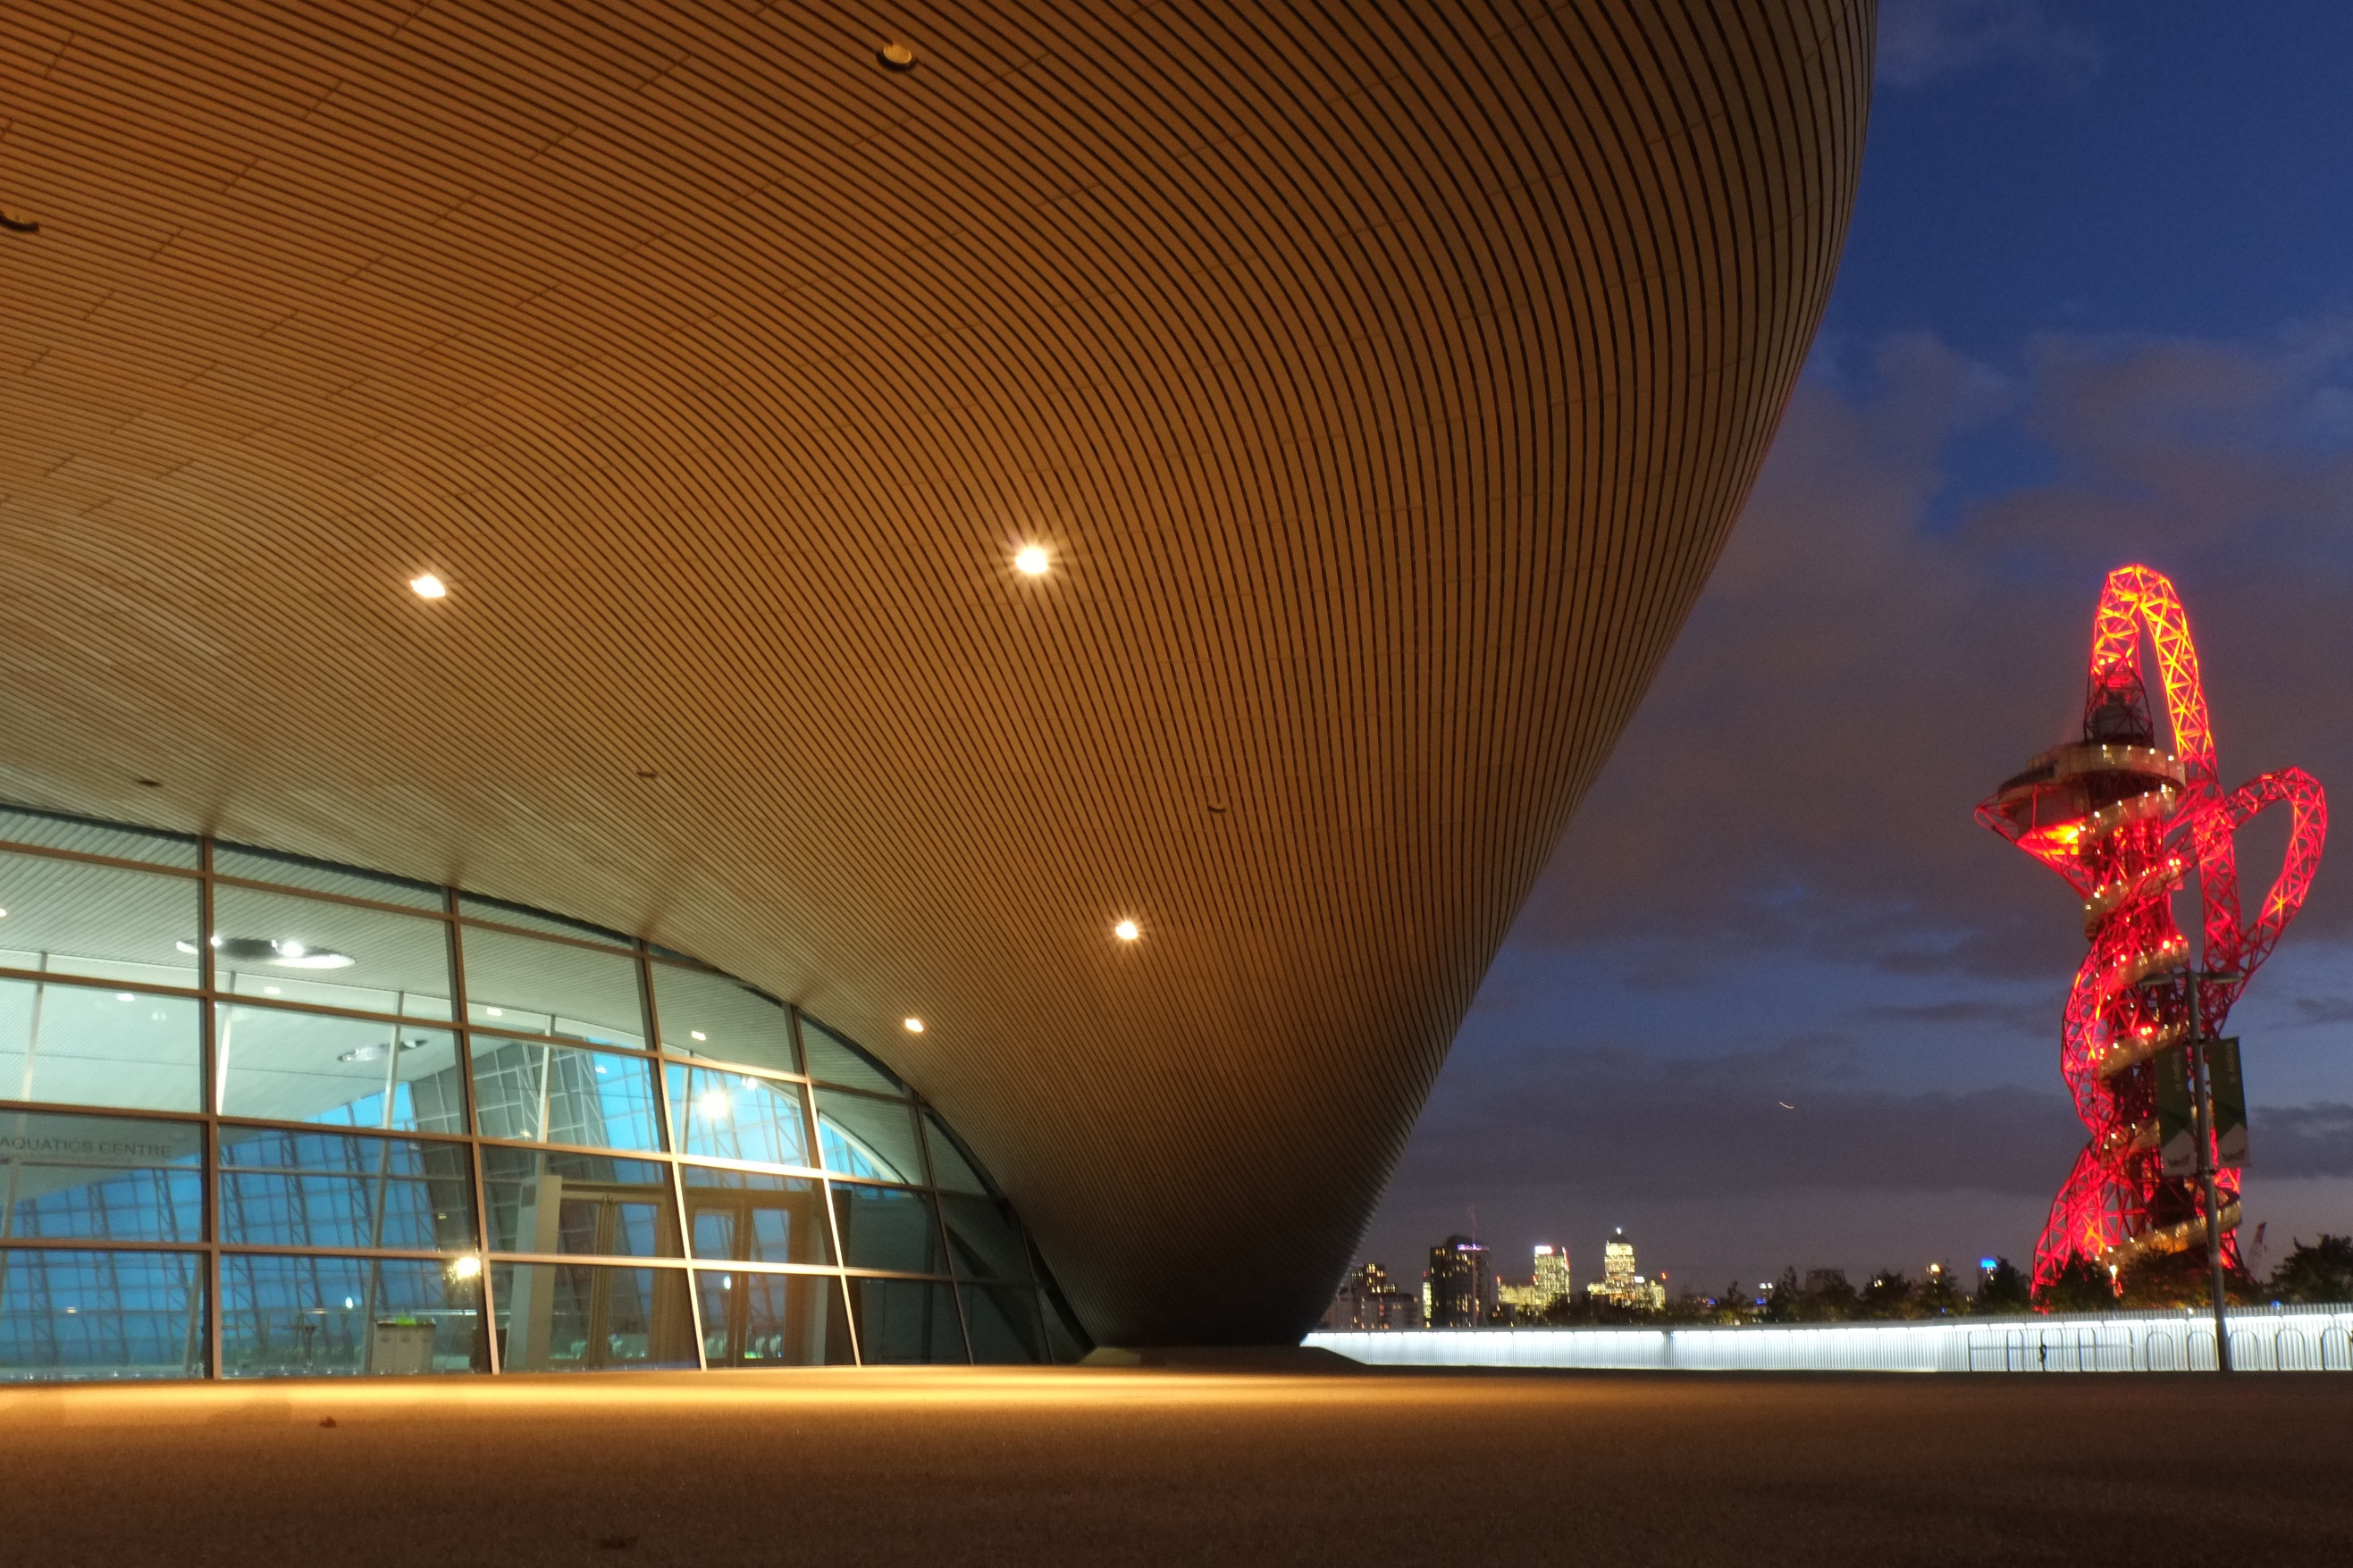 The London Aquatics Centre: perfect for an early morning dip. Image by Sally Schafer / Lonely Planet